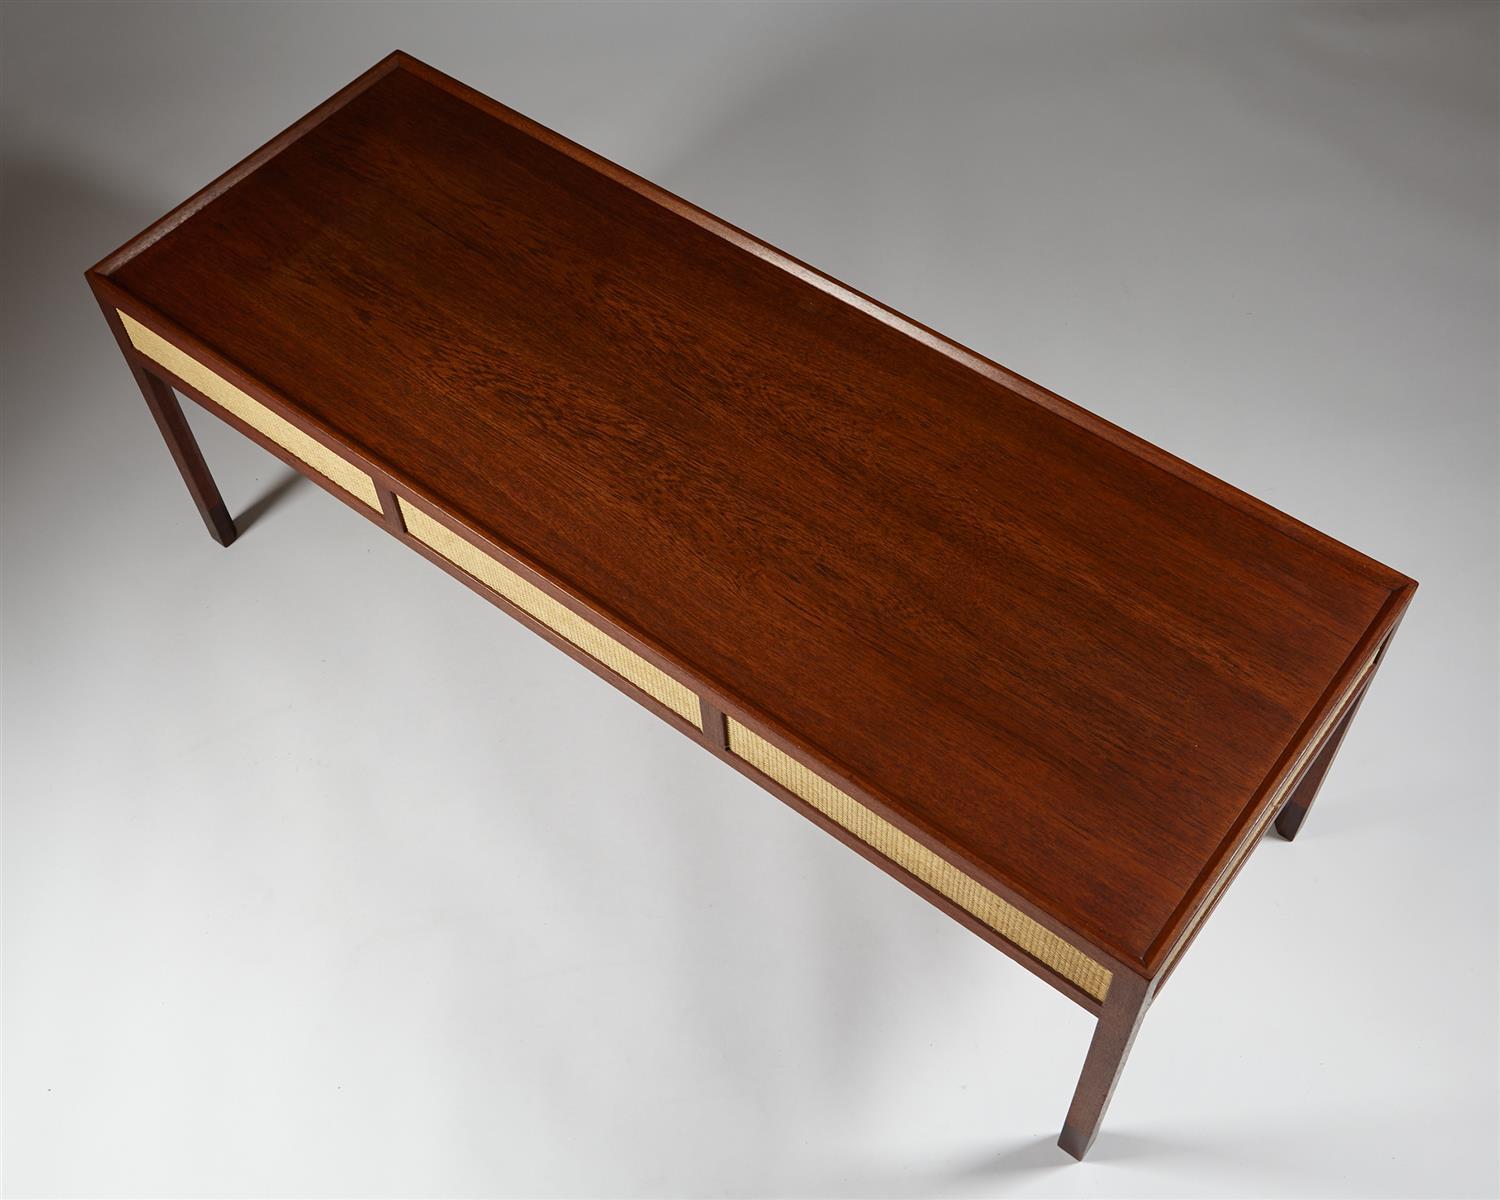 Rosewood Occasional Table Designed by Mogens Lassen for T. Madsen, Denmark, 1953 For Sale 1